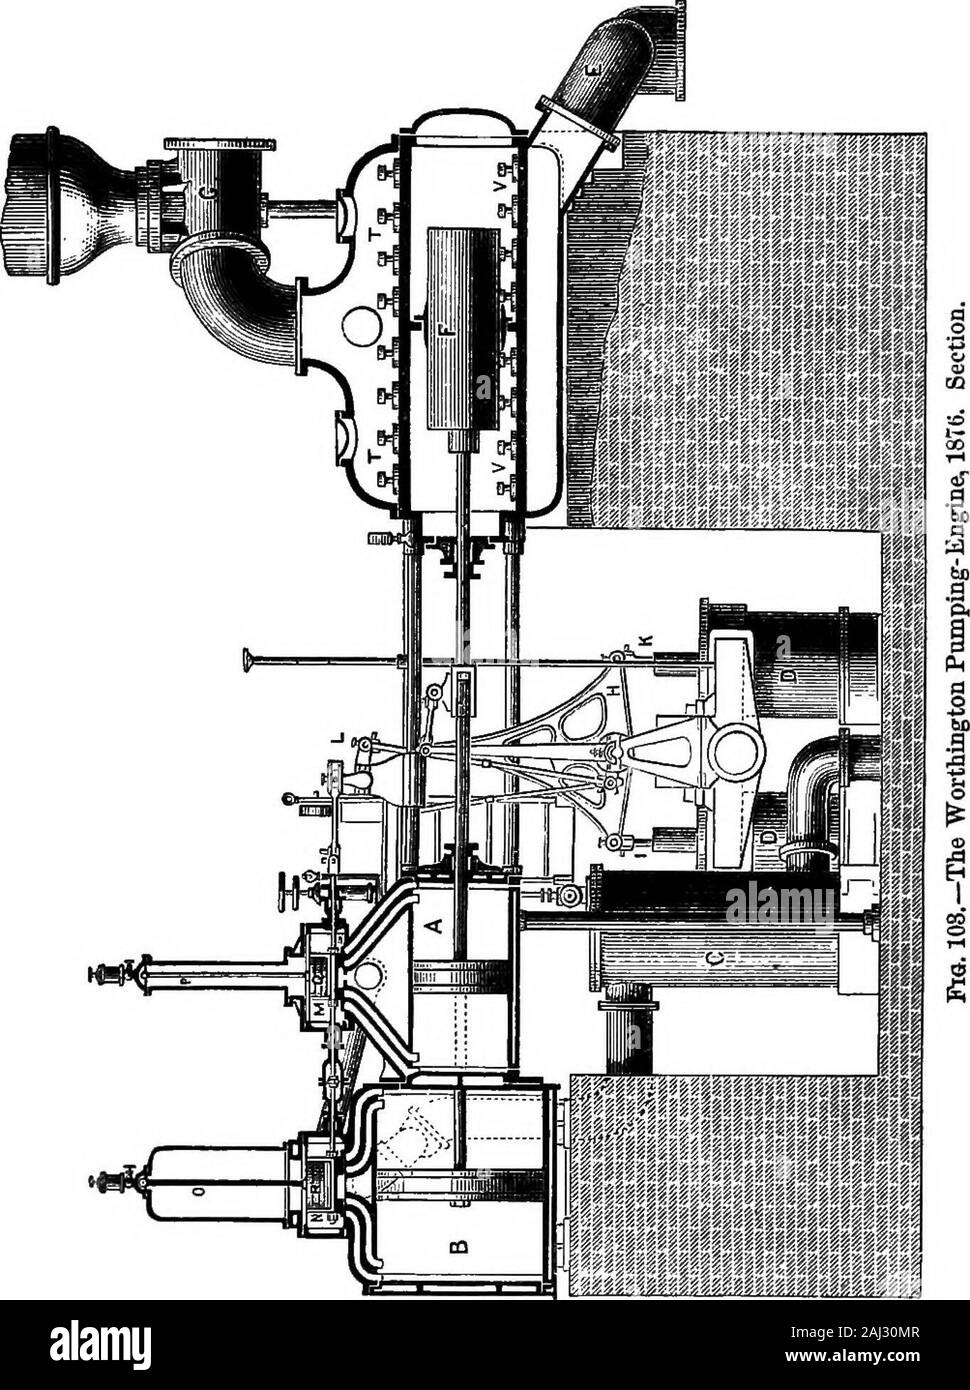 A history of the growth of the steam-engine . ce of the crank and fly-wheel, orof independent mechanism, like the cataract of the Cornishengine. There is a very considerable variety of pumps ofthis class, all differing in detail, but all presenting the dis-tinguishing feature of auxiliary valve and piston, and aconnection by which it and the main engine each works thevalve of the other combination. In some cases these pumps are made of considerablesize, and are applied to the elevation of water in situationsto which the Cornish engine was formerly considered exclu-sively applicable. The accomp Stock Photo